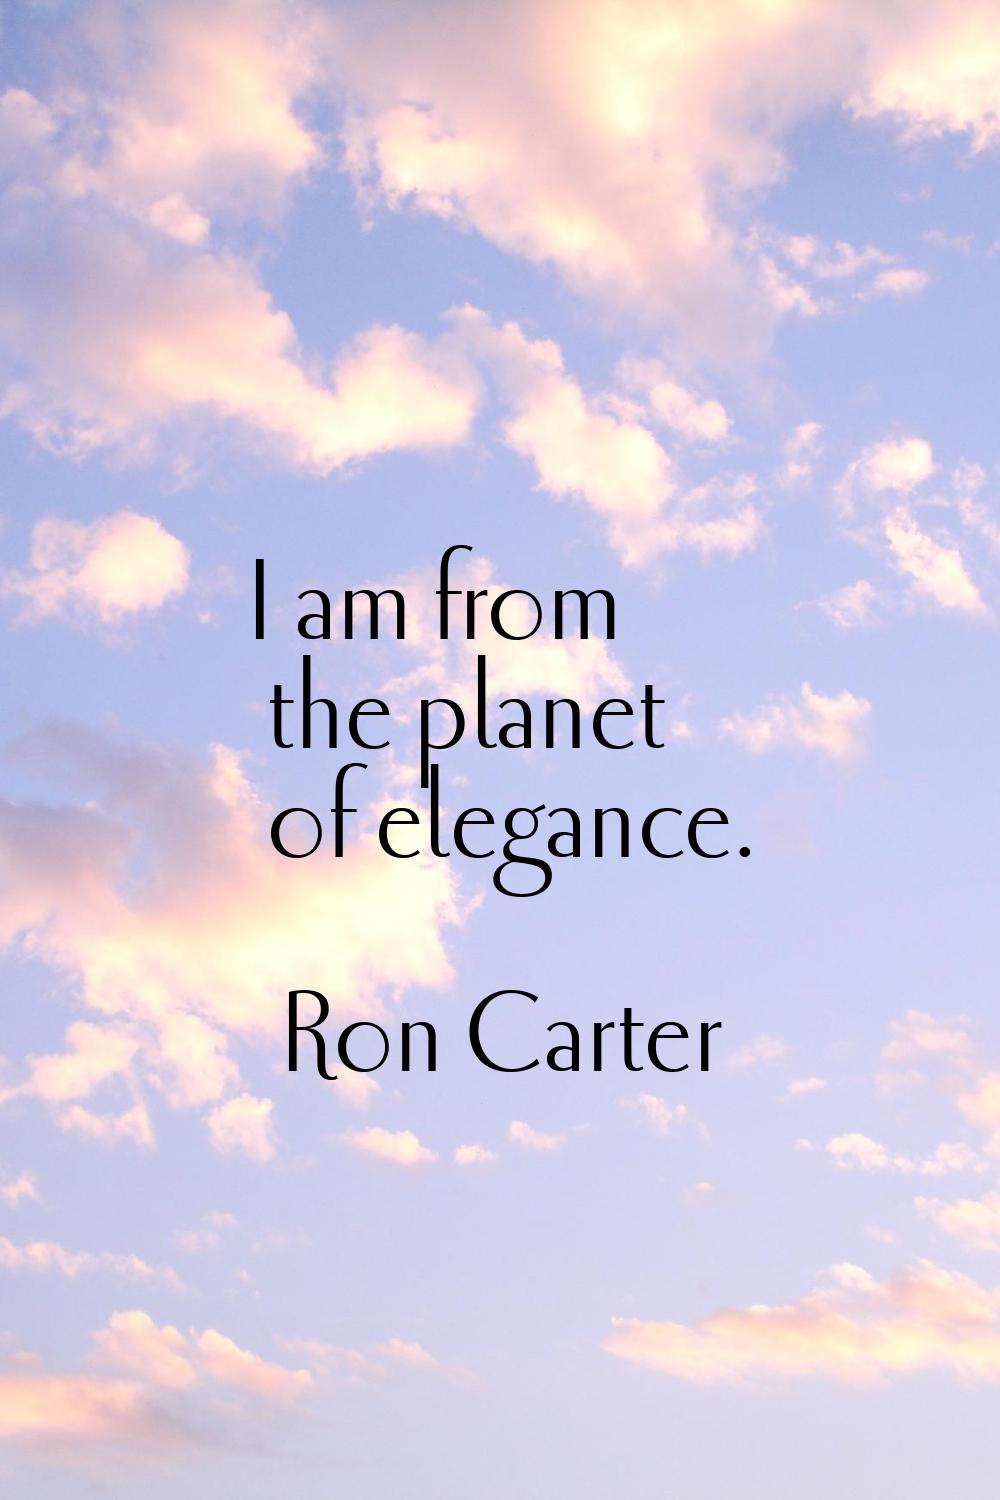 I am from the planet of elegance.